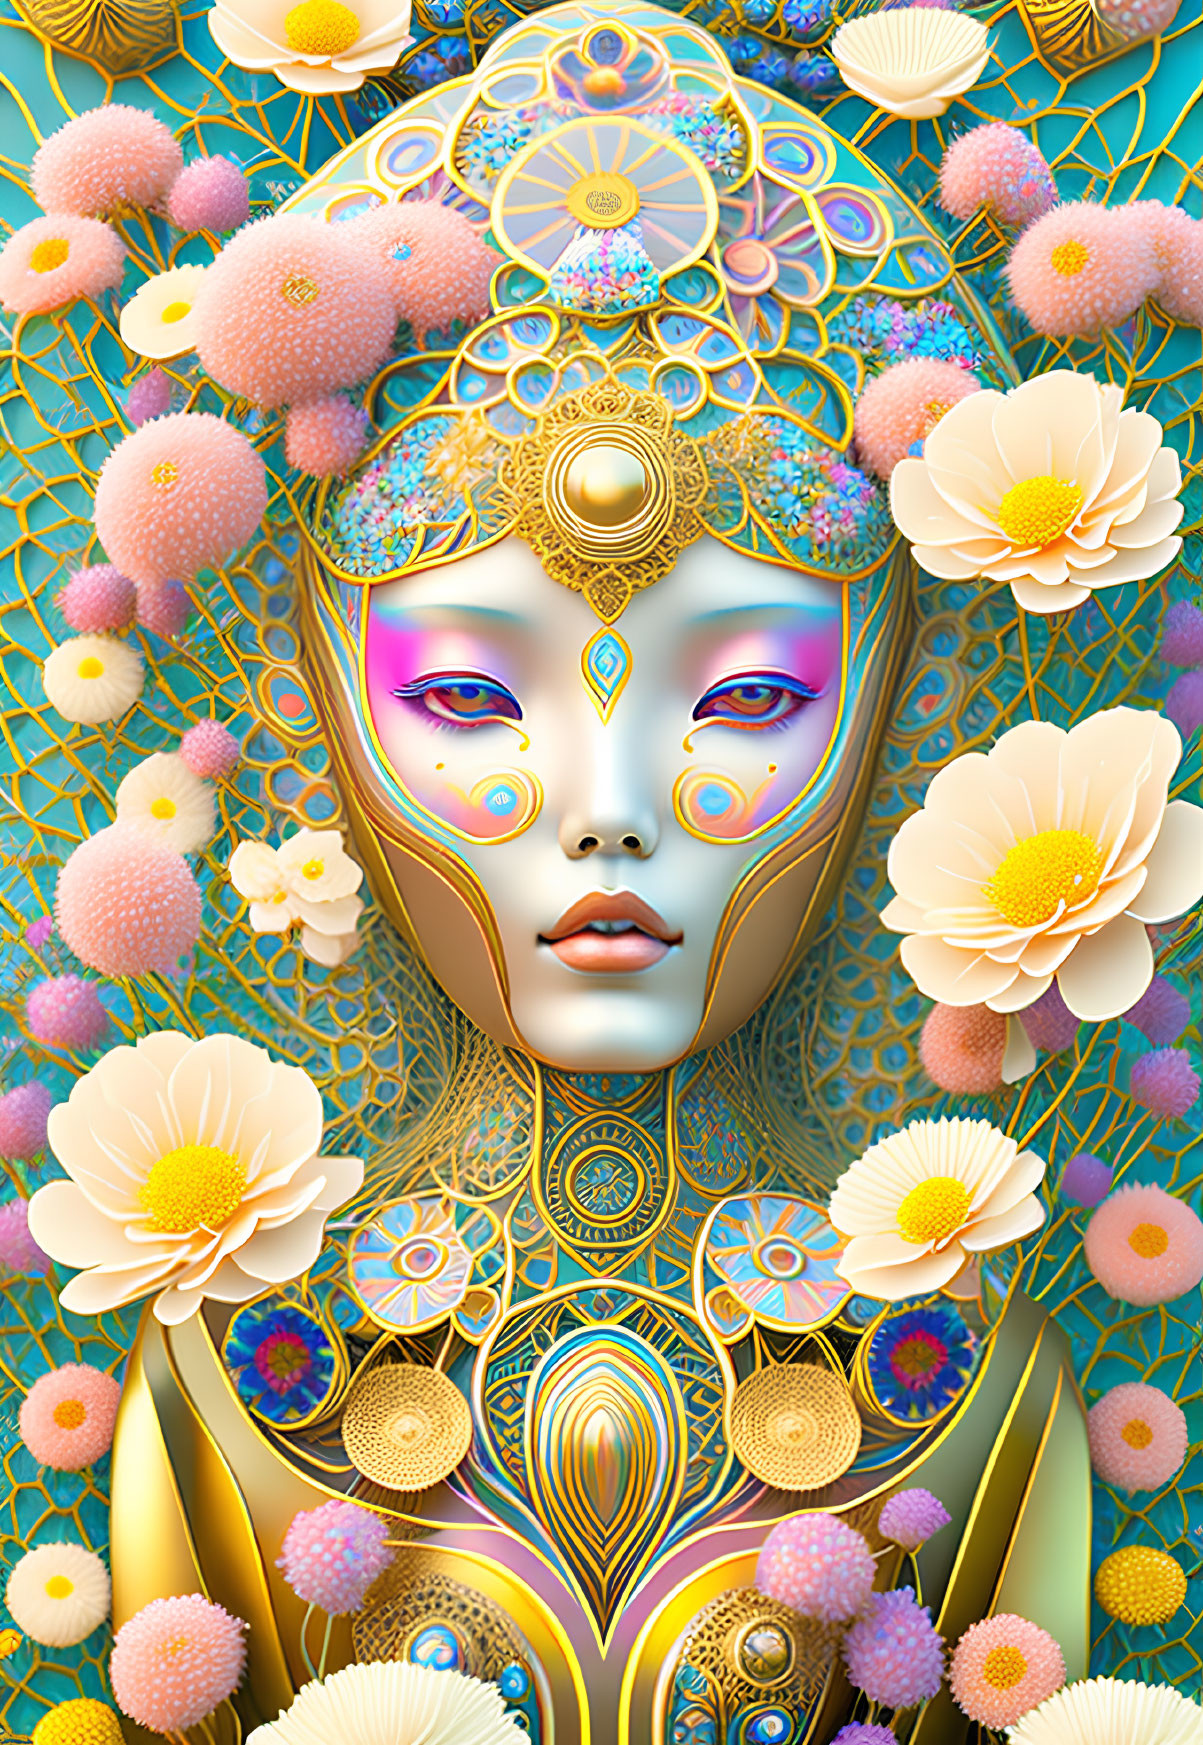 Digital Artwork: Female Figure with Golden Patterns and Floral Surroundings